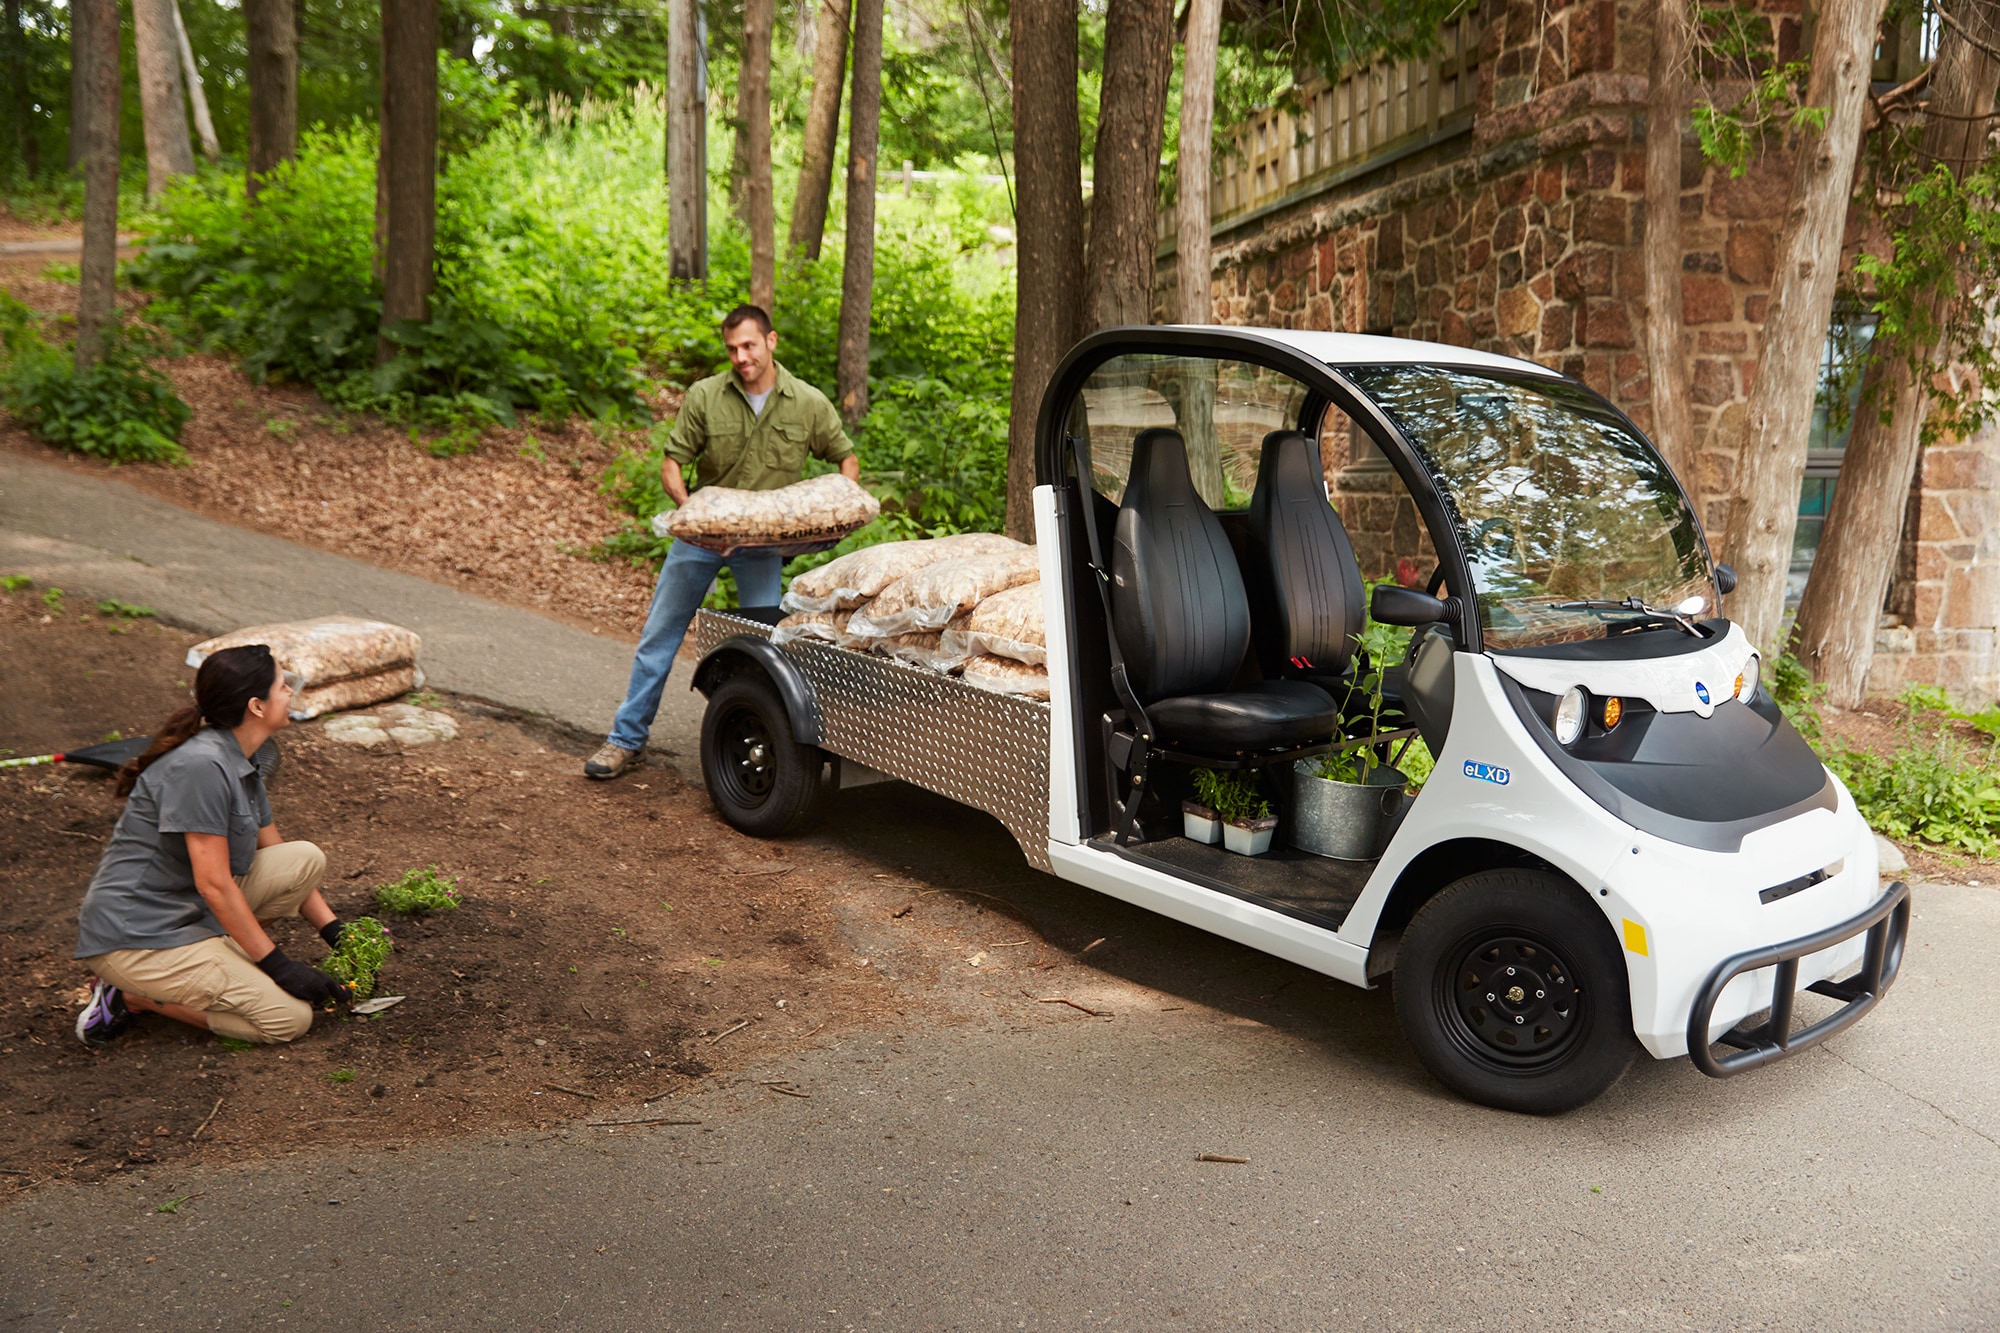 A man unloading bags of mulch from an electric vehicle next to a woman planting in the park